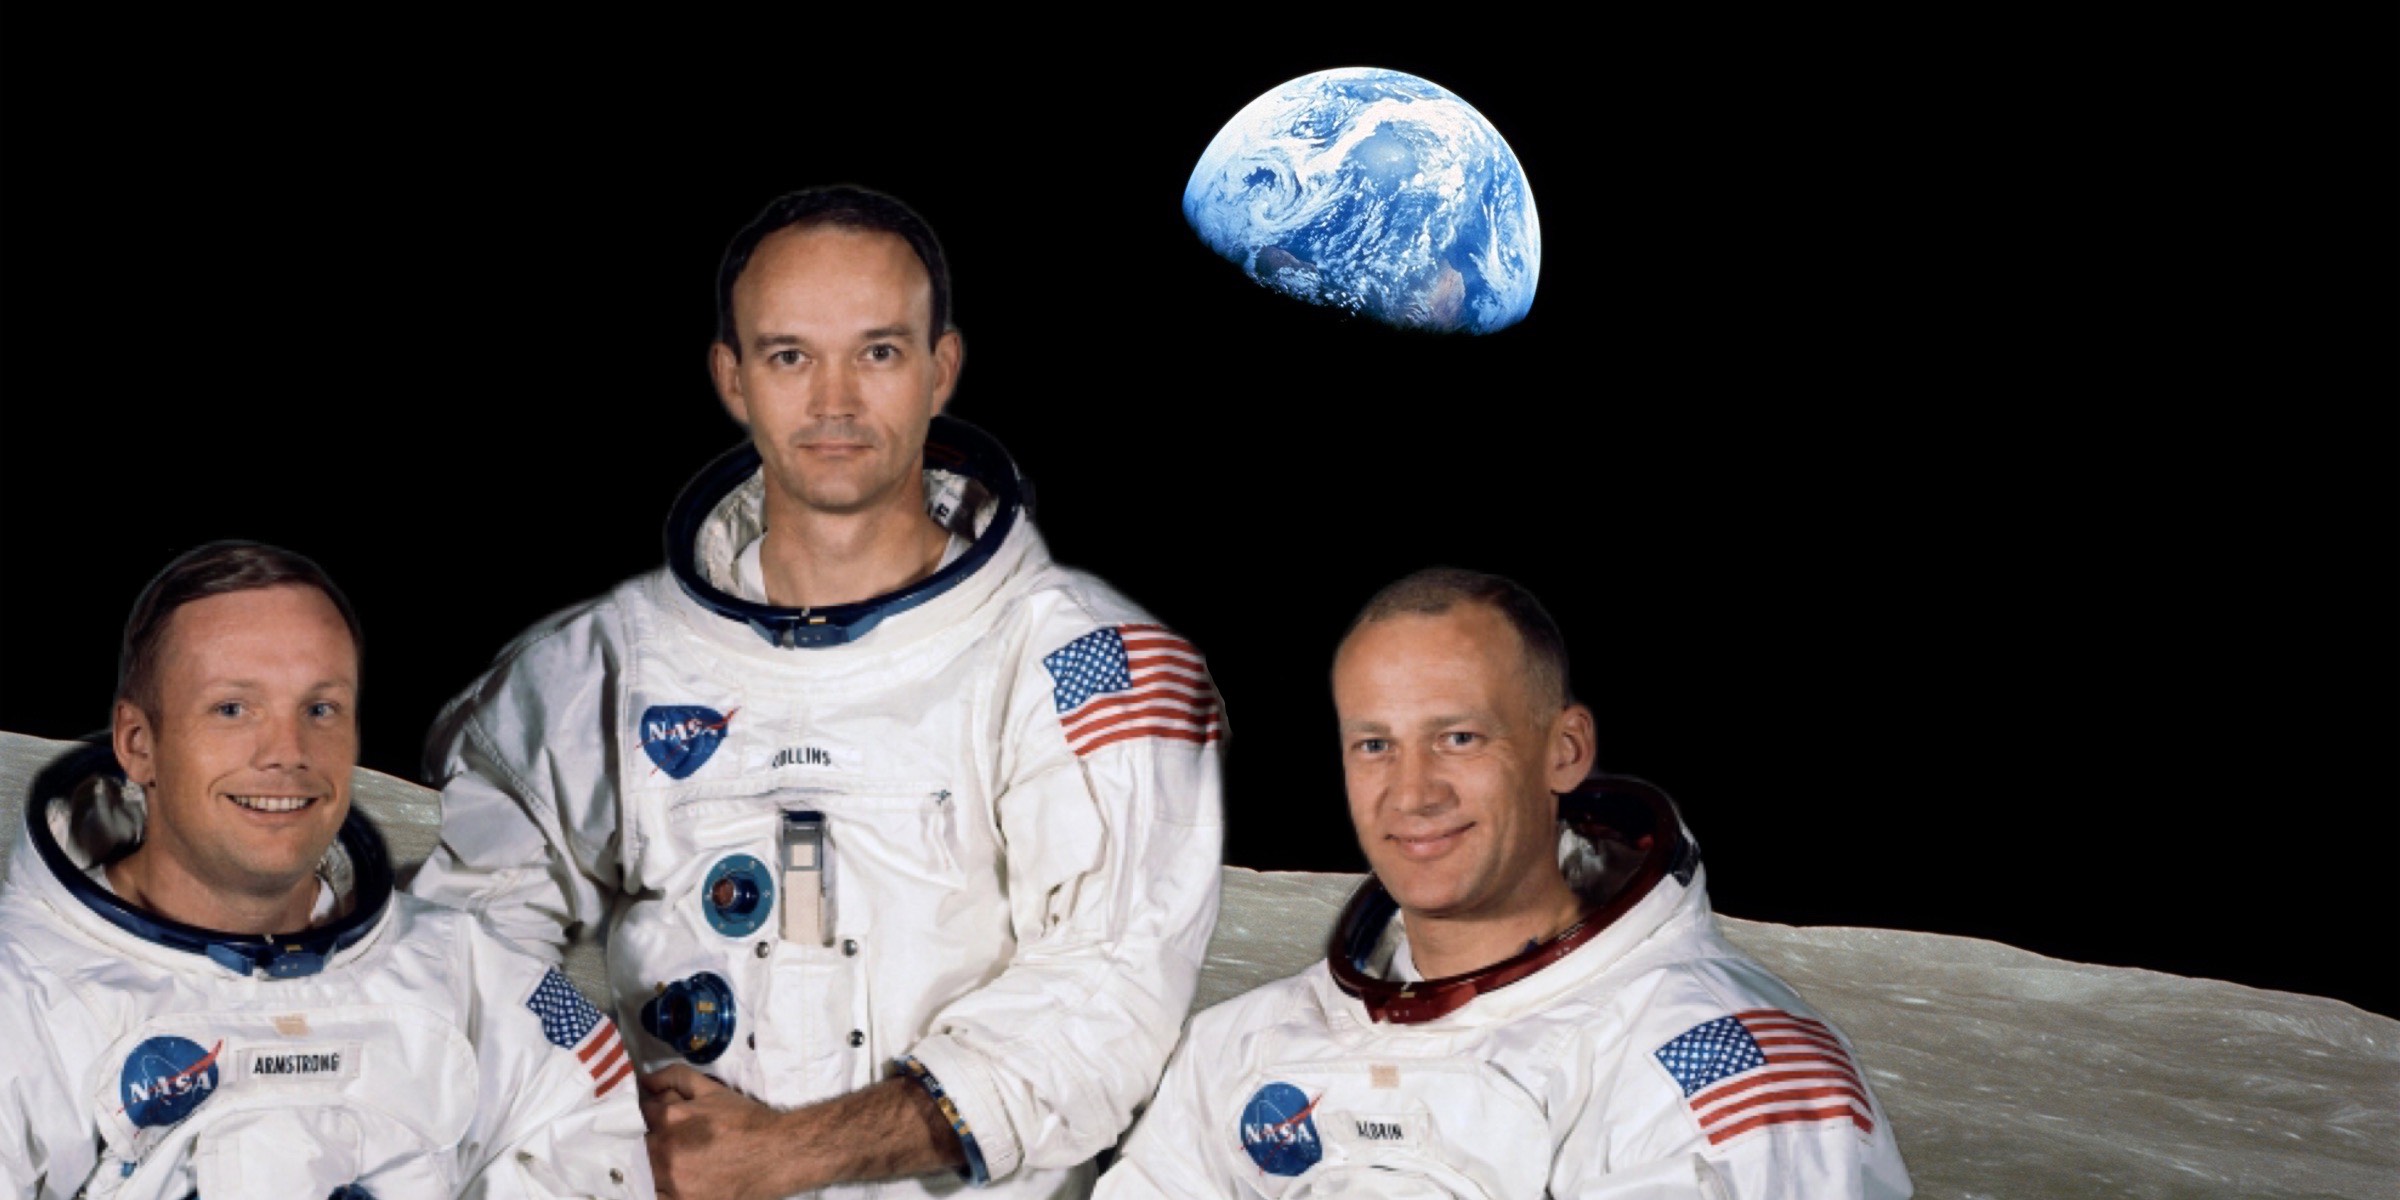 Our Greatest Adventure: The Apollo Missions